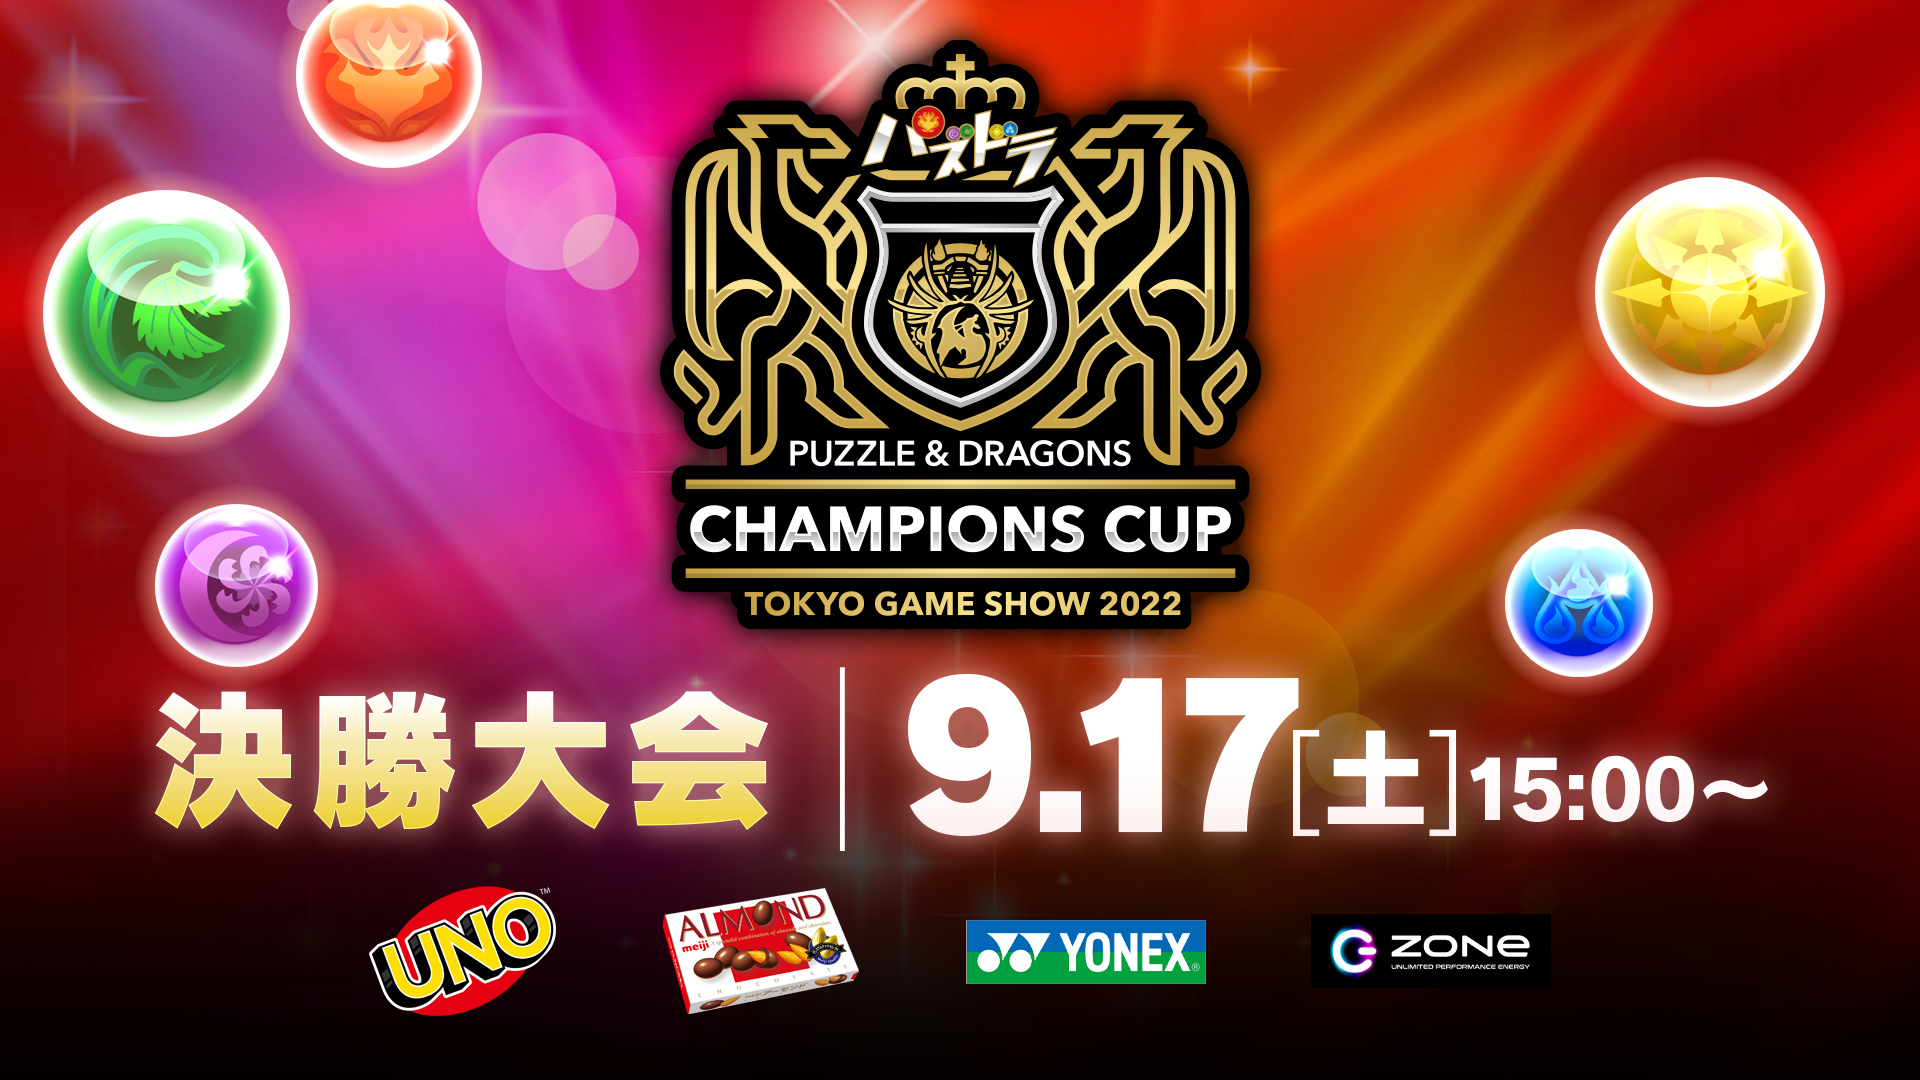 Puzzle & Dragons Champions Cup TOKYO GAME SHOW 2022 Finals